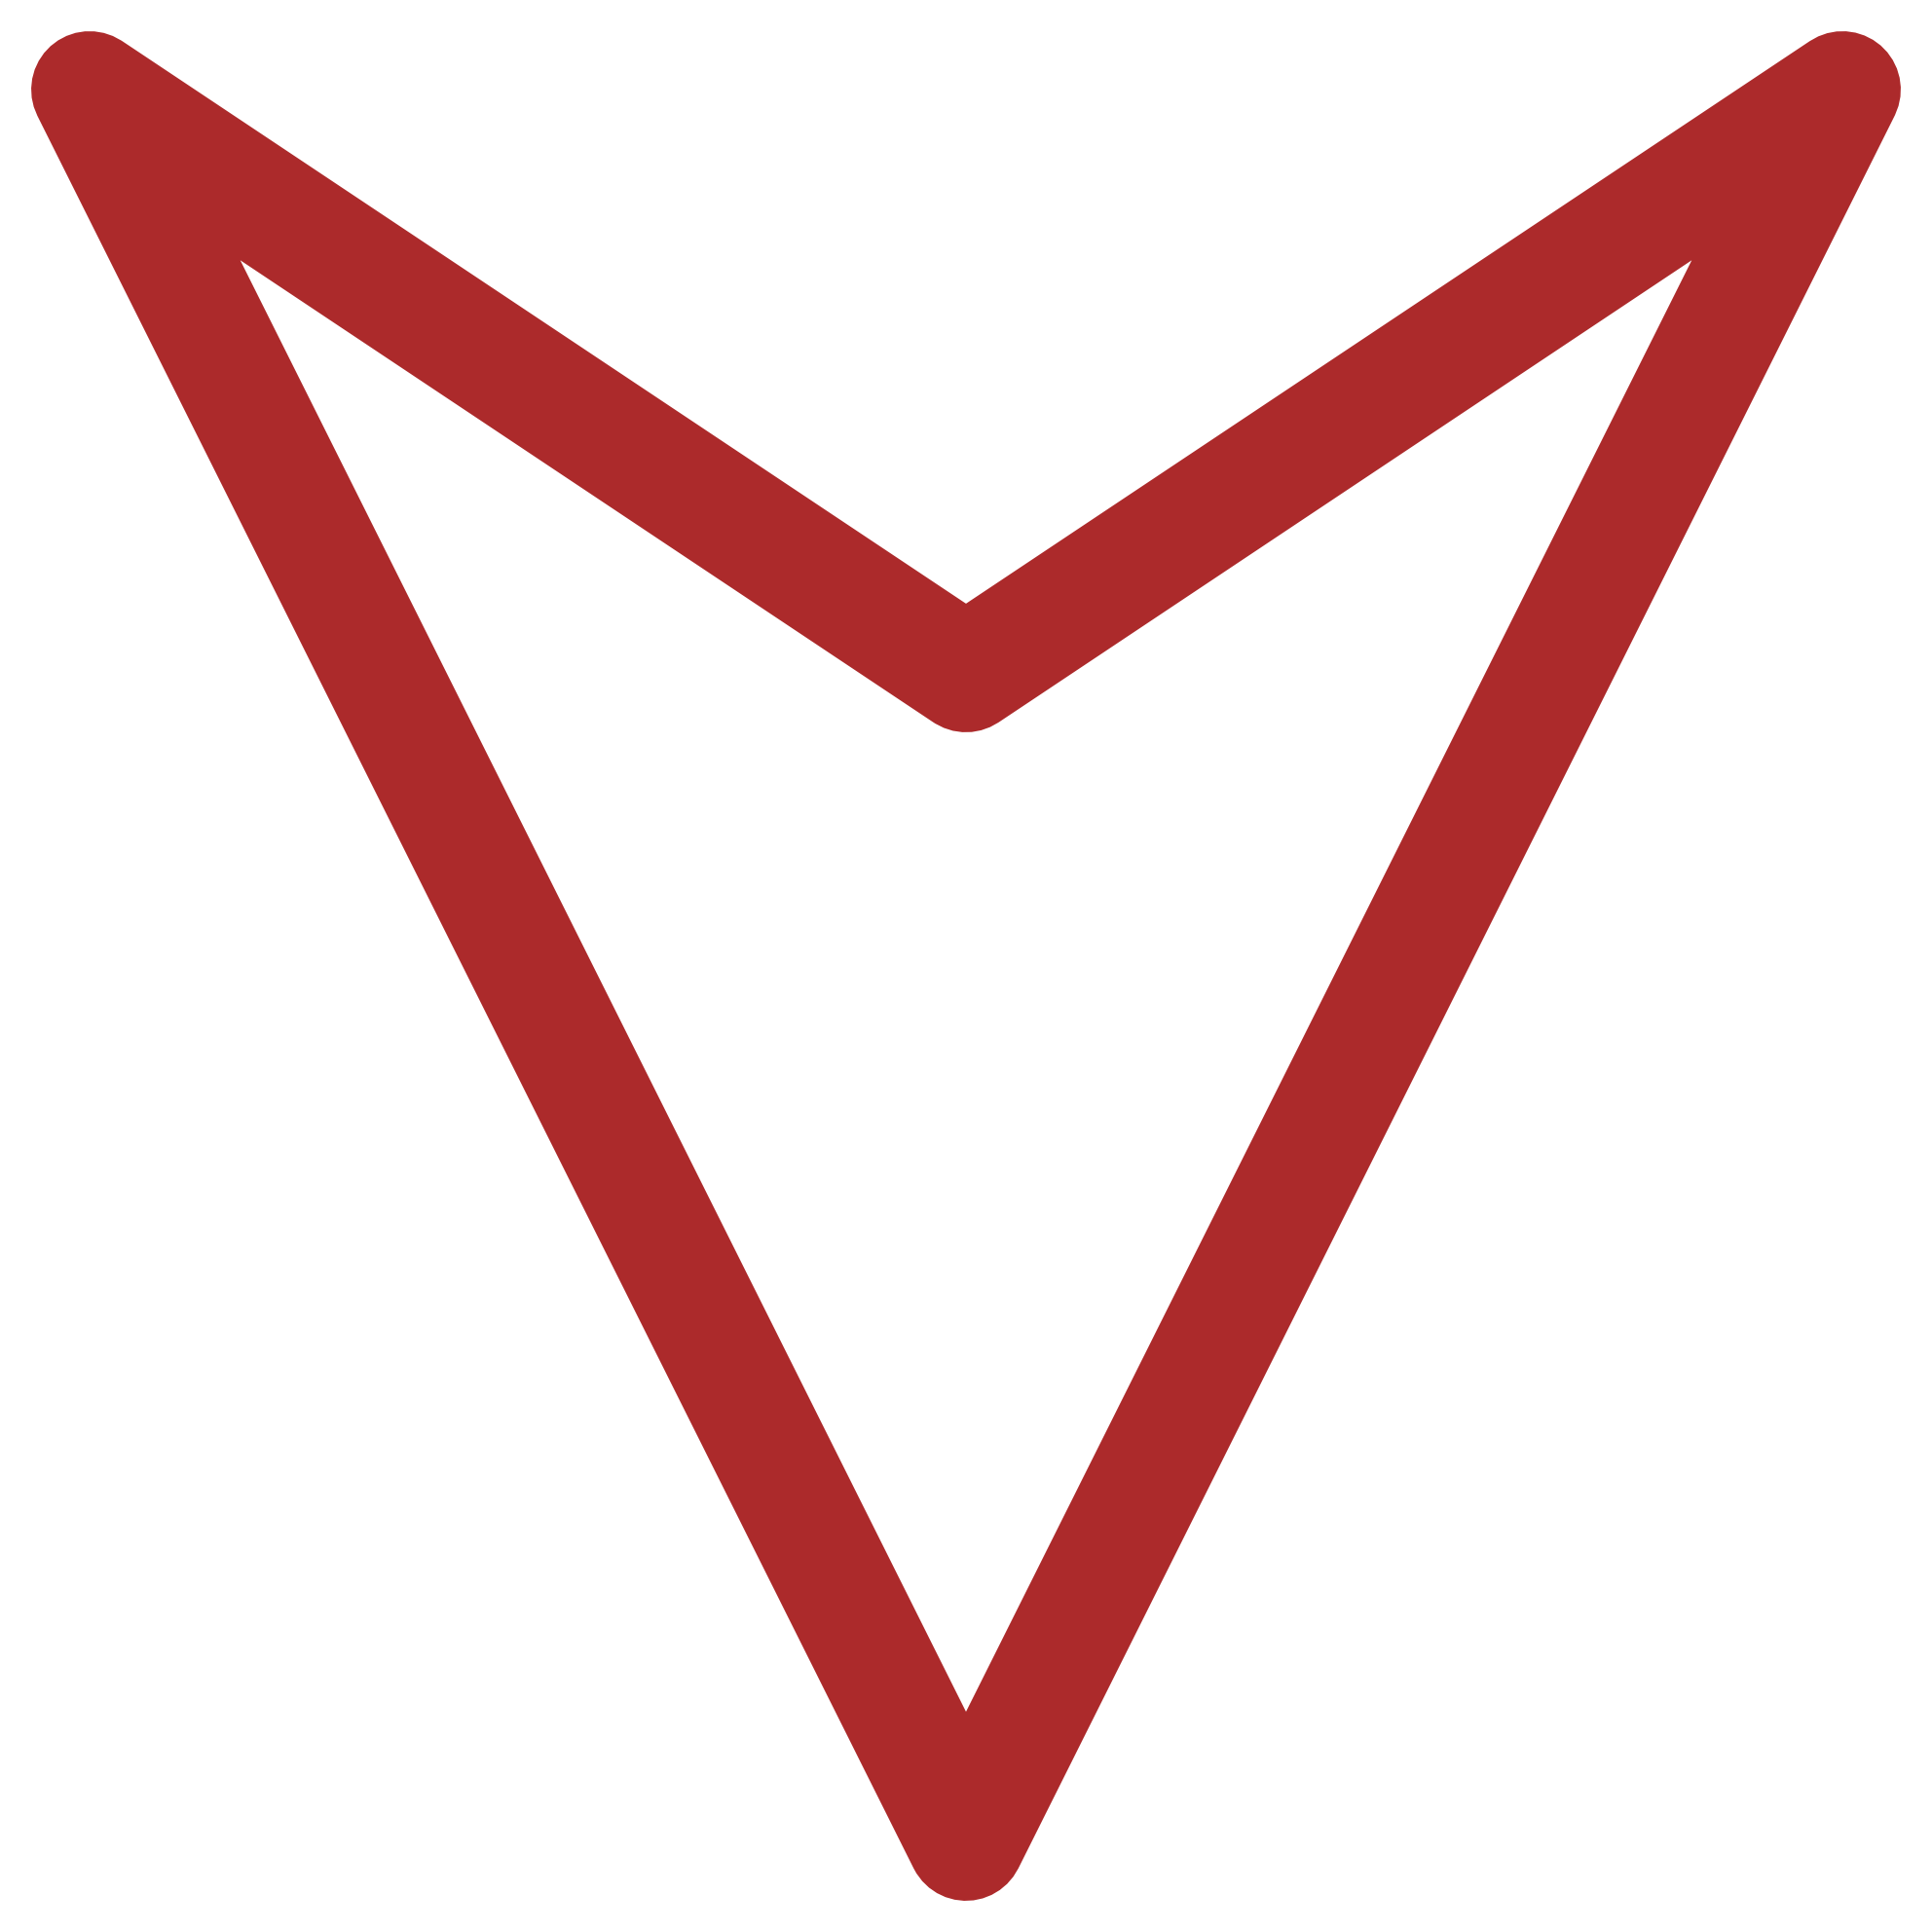 Diagonal Red Arrow Logo - Download Free Red Arrow PNG Image Icon and PNG Background